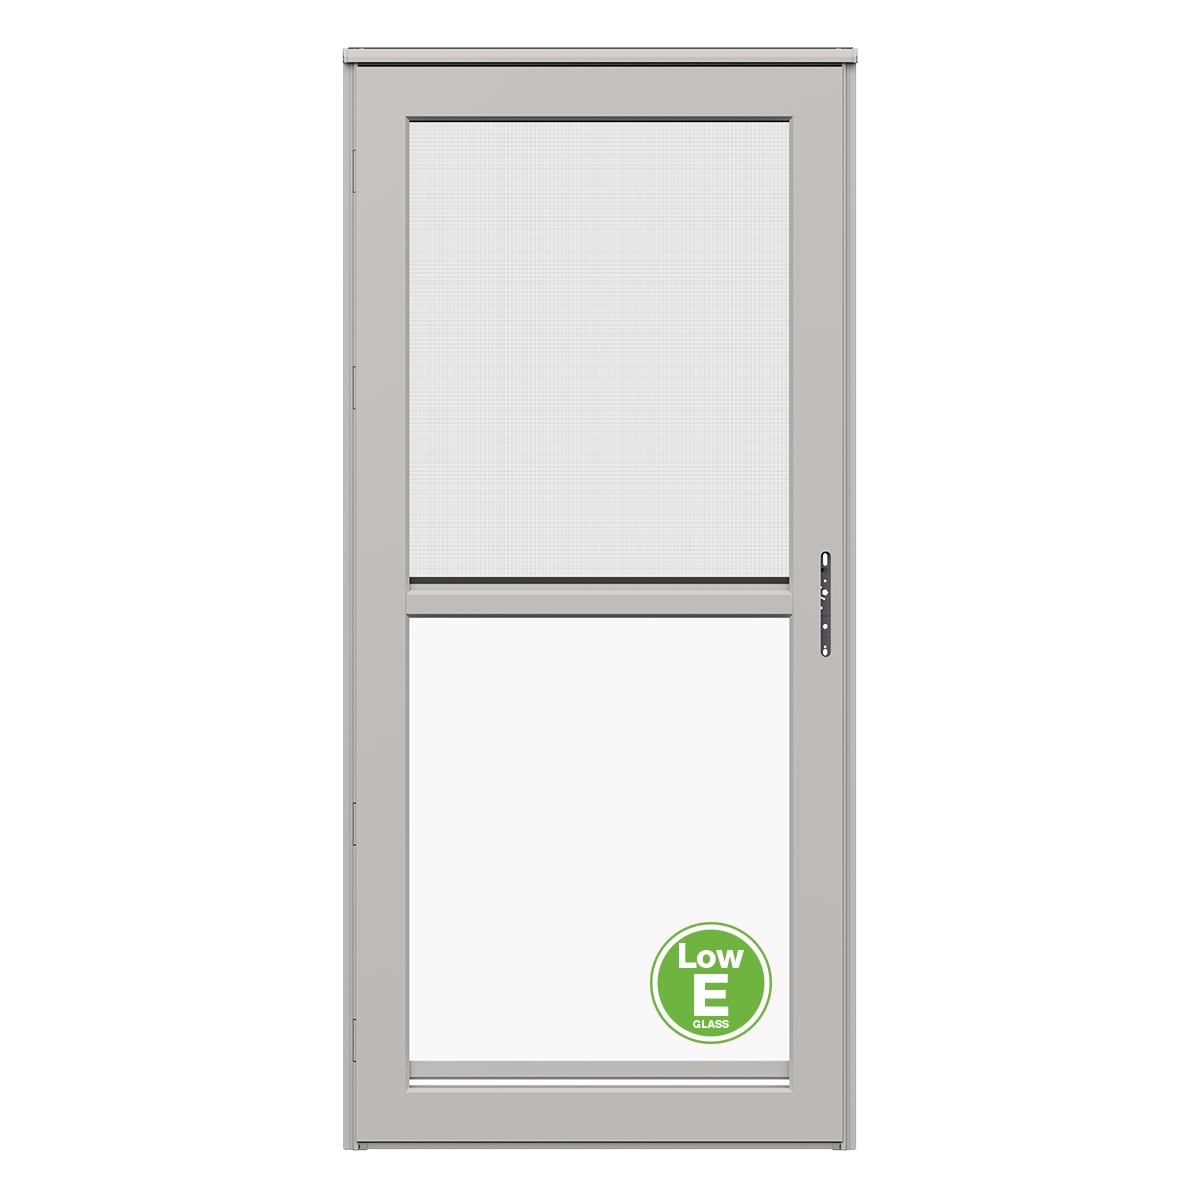 Platinum 36-in x 81-in Pebblestone Full-view Retractable Screen Aluminum Storm Door Right-Hand Outswing in Brown | - LARSON 45604372LE